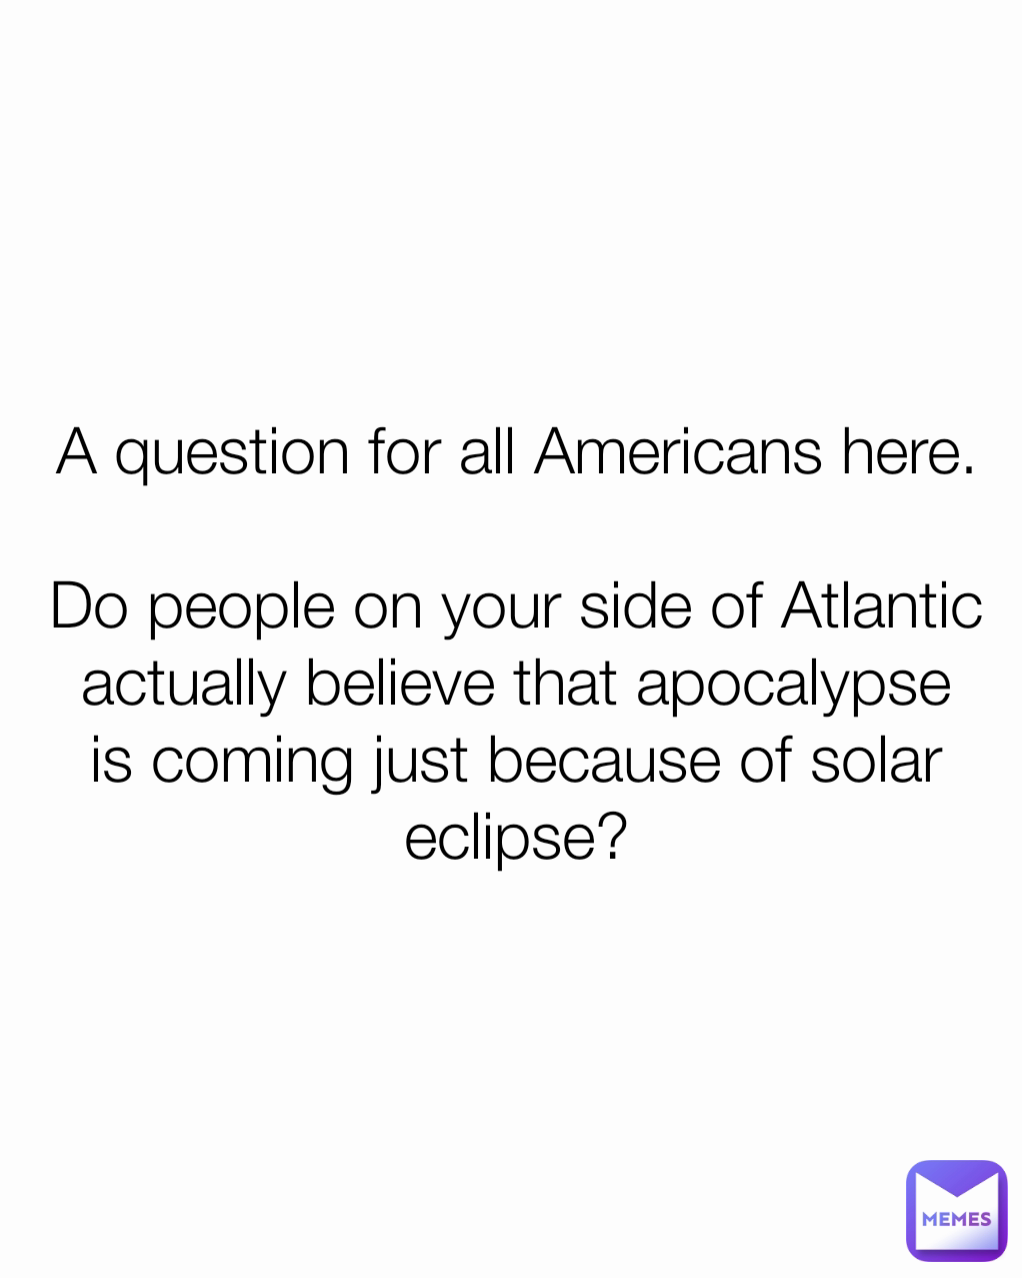 A question for all Americans here.

Do people on your side of Atlantic actually believe that apocalypse is coming just because of solar eclipse?